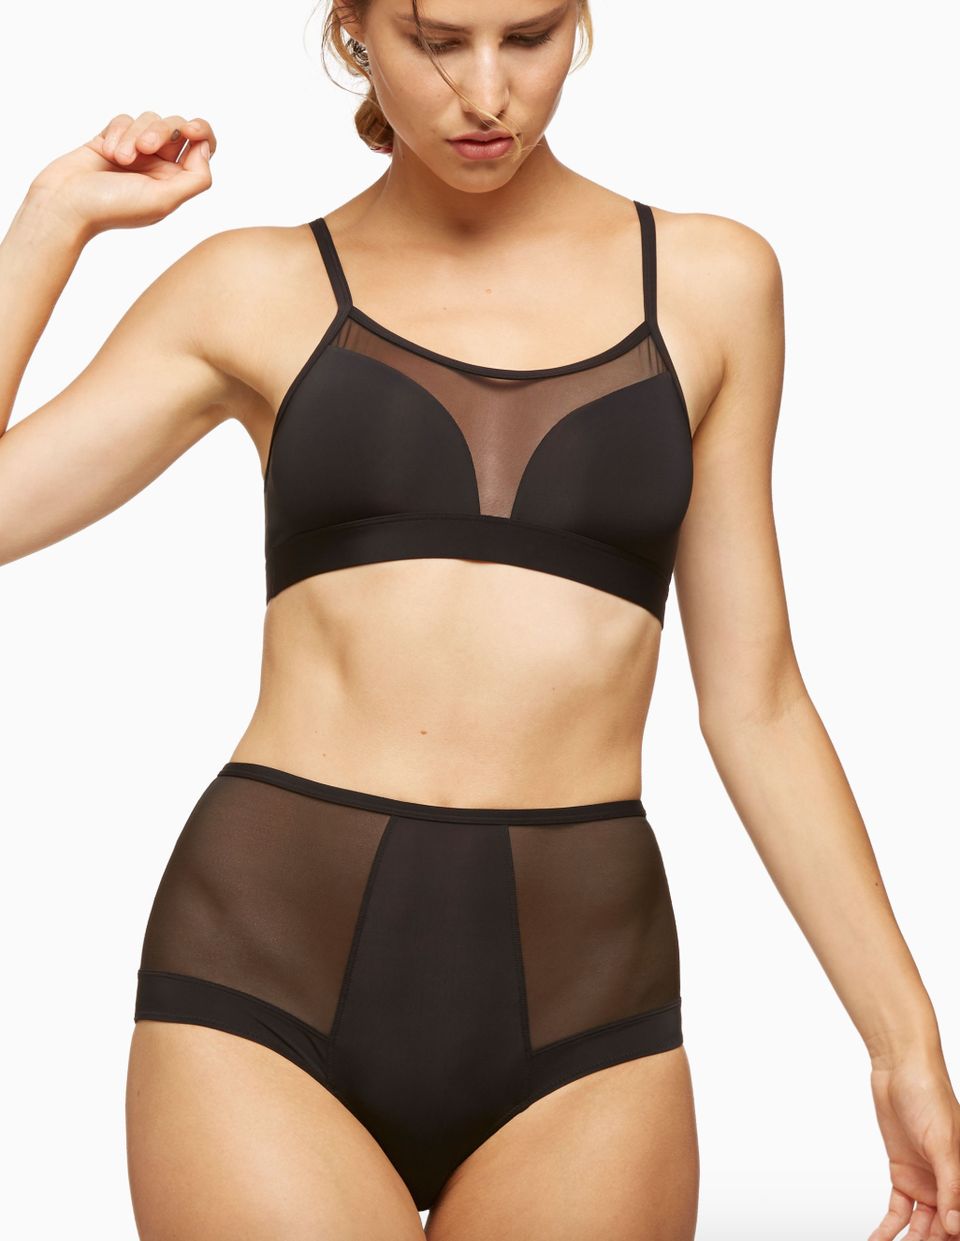 Minimal Lingerie Without the Lace or Frills - COOL HUNTING®